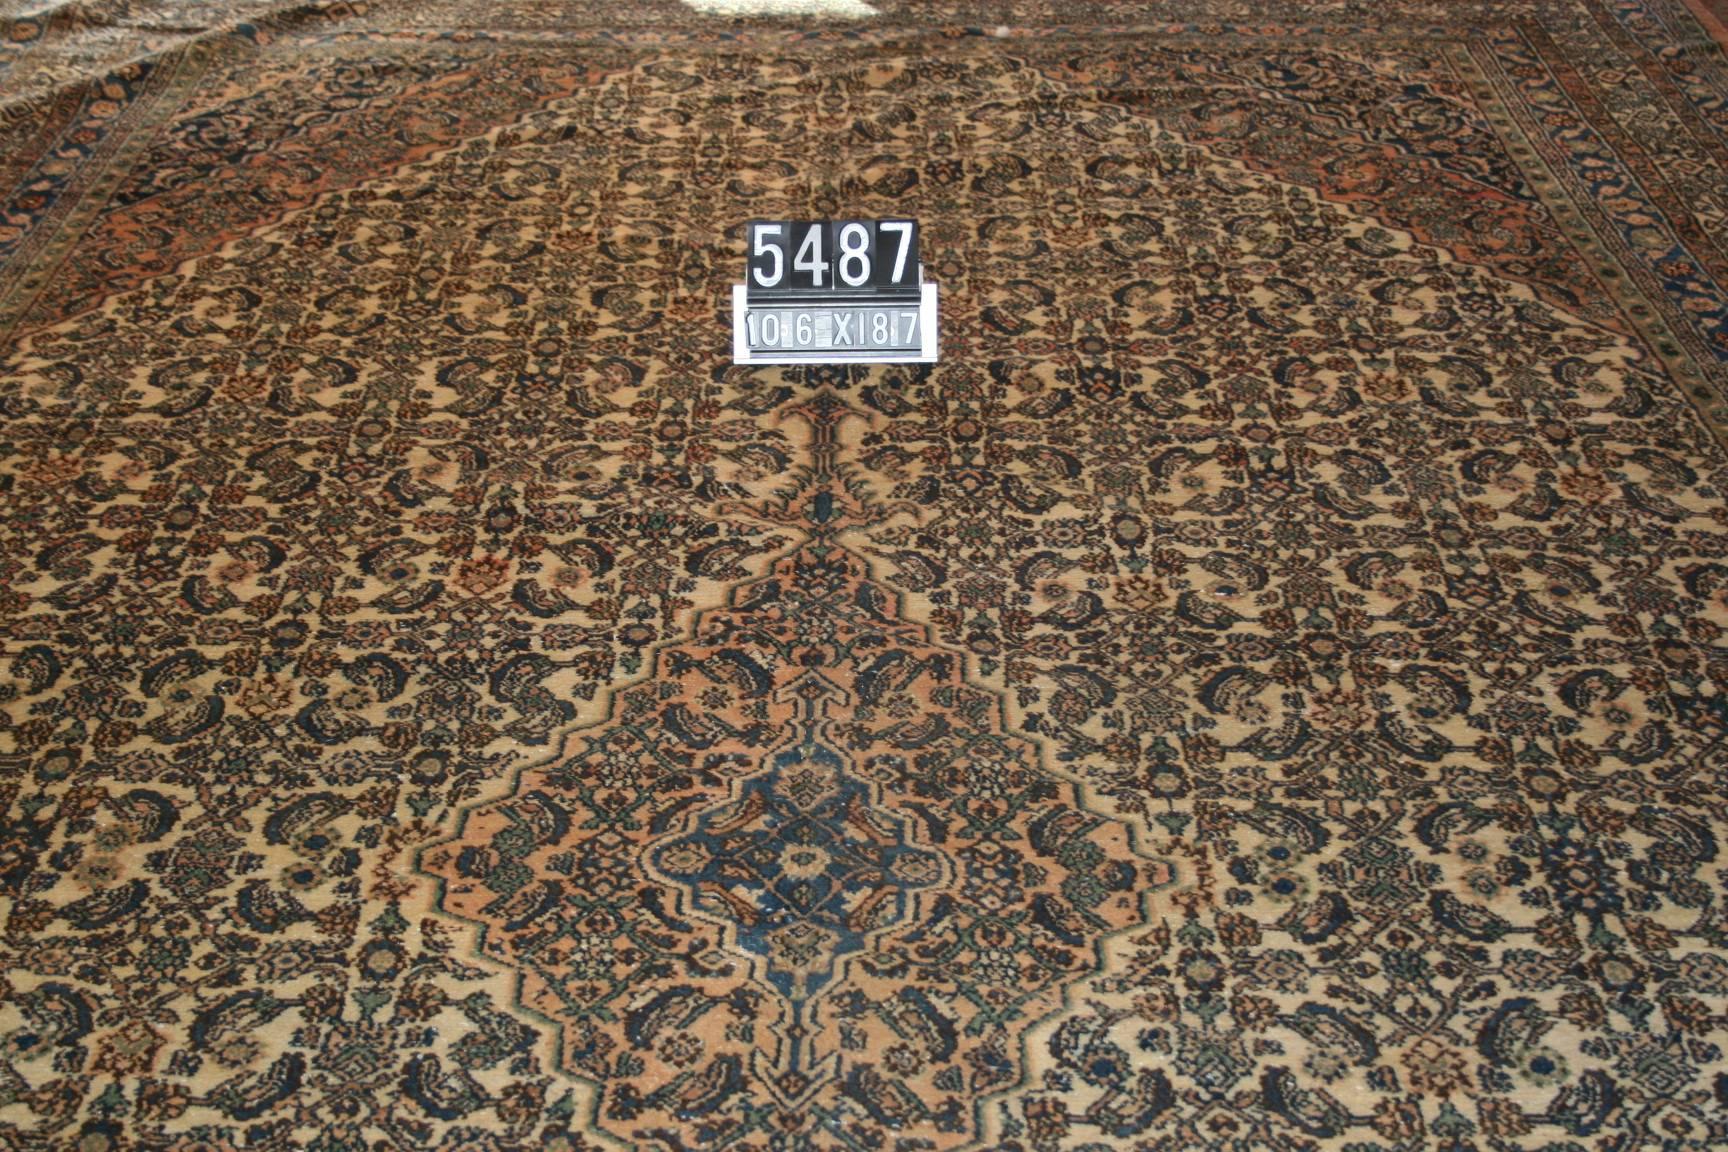 Glorious antique Bibikabad Persian gallery rug. This carpet was a special order entry or gallery carpet woven in the western sector of Persia present day Iran. The wool is a blend of camel hair and fine sheep wool. The design is a tight medallion on